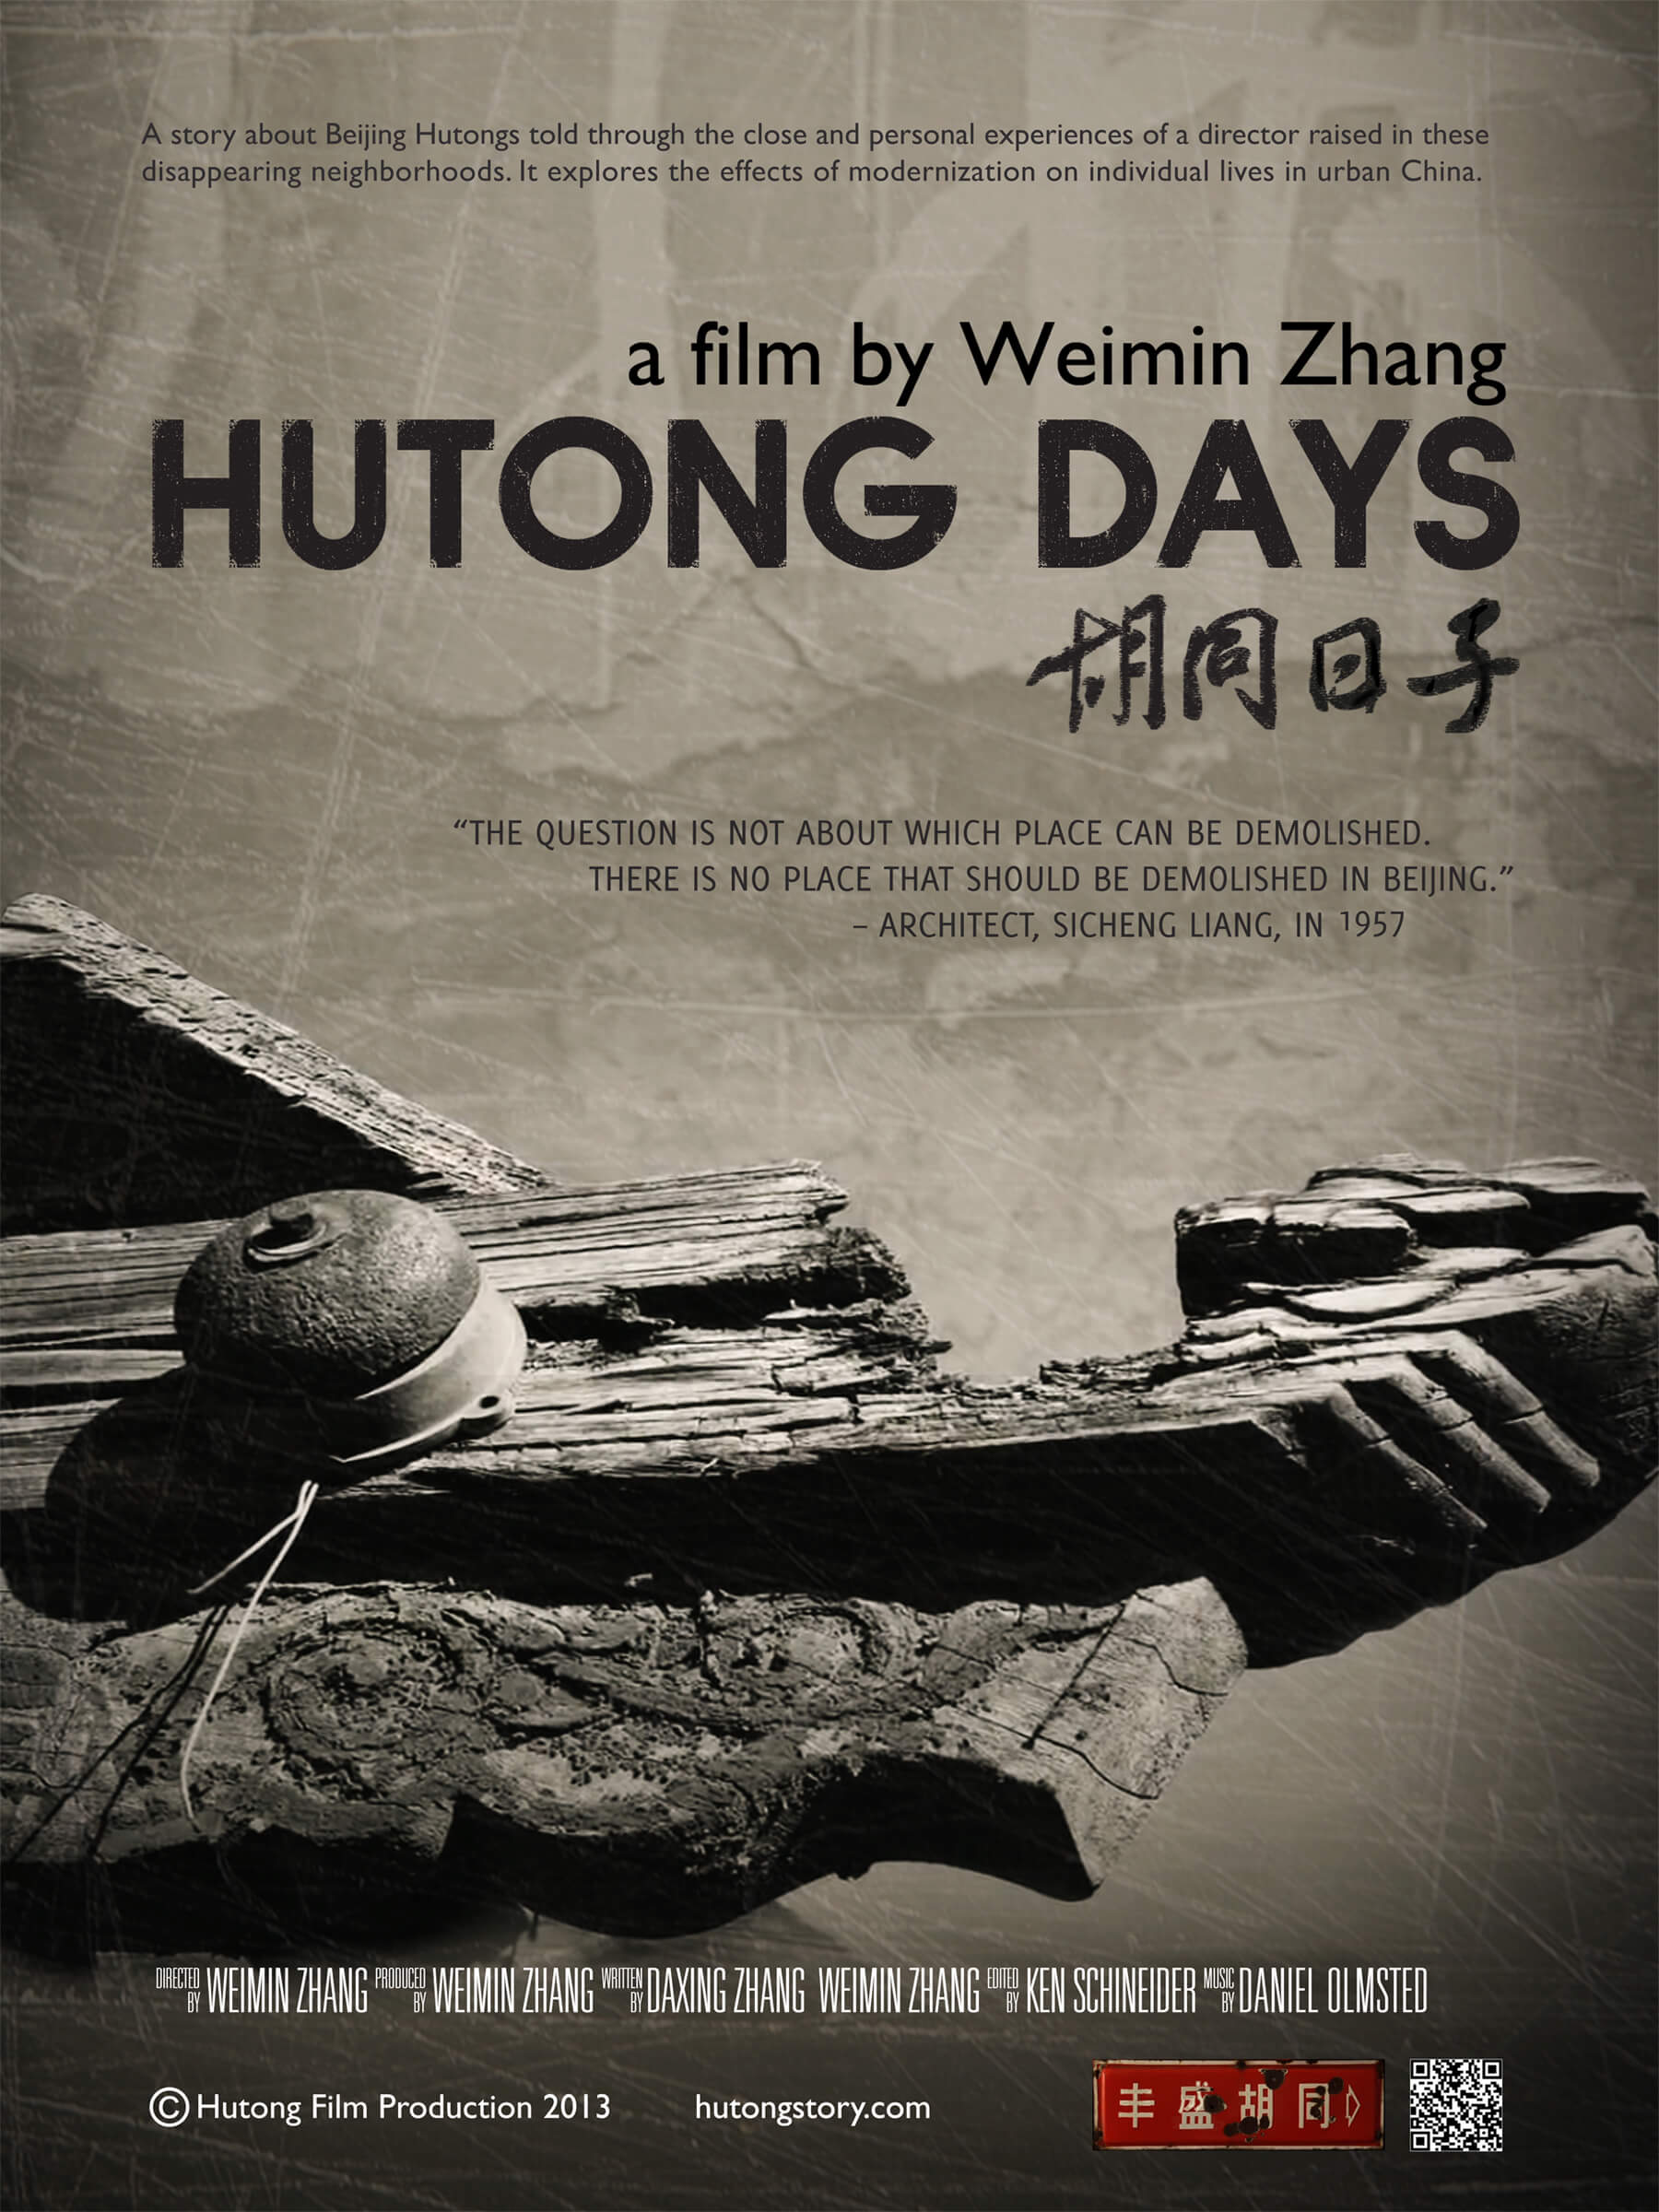 Missing Home: The Last Days of the Beijing Hutongs Weimin Zhang